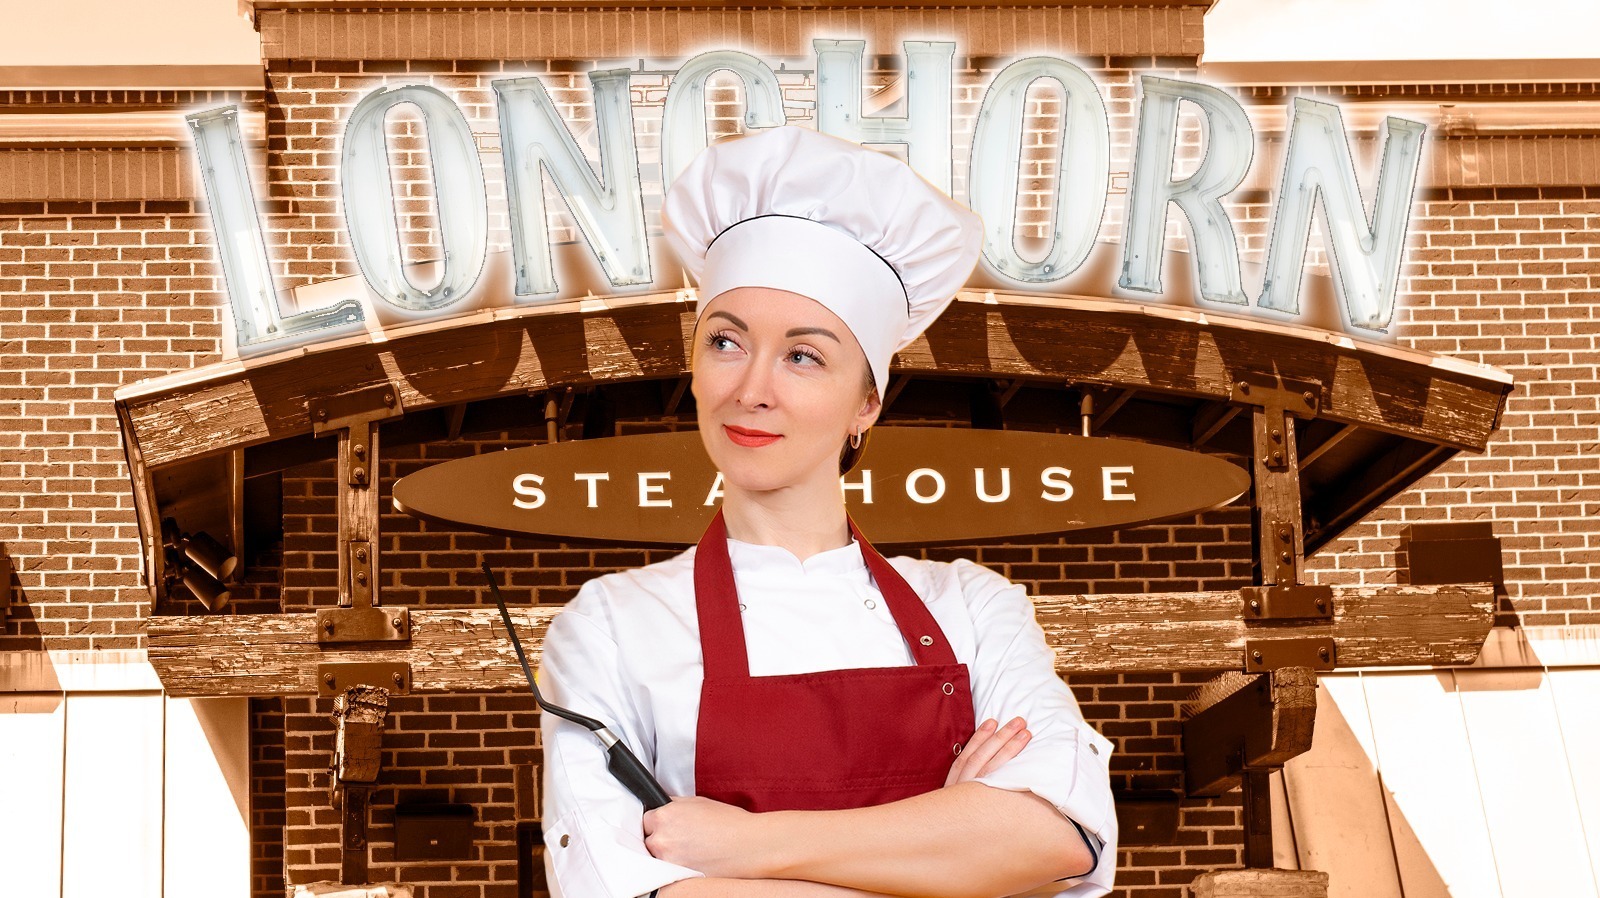 I Worked At Longhorn Steakhouse. Here's What I Learned About It